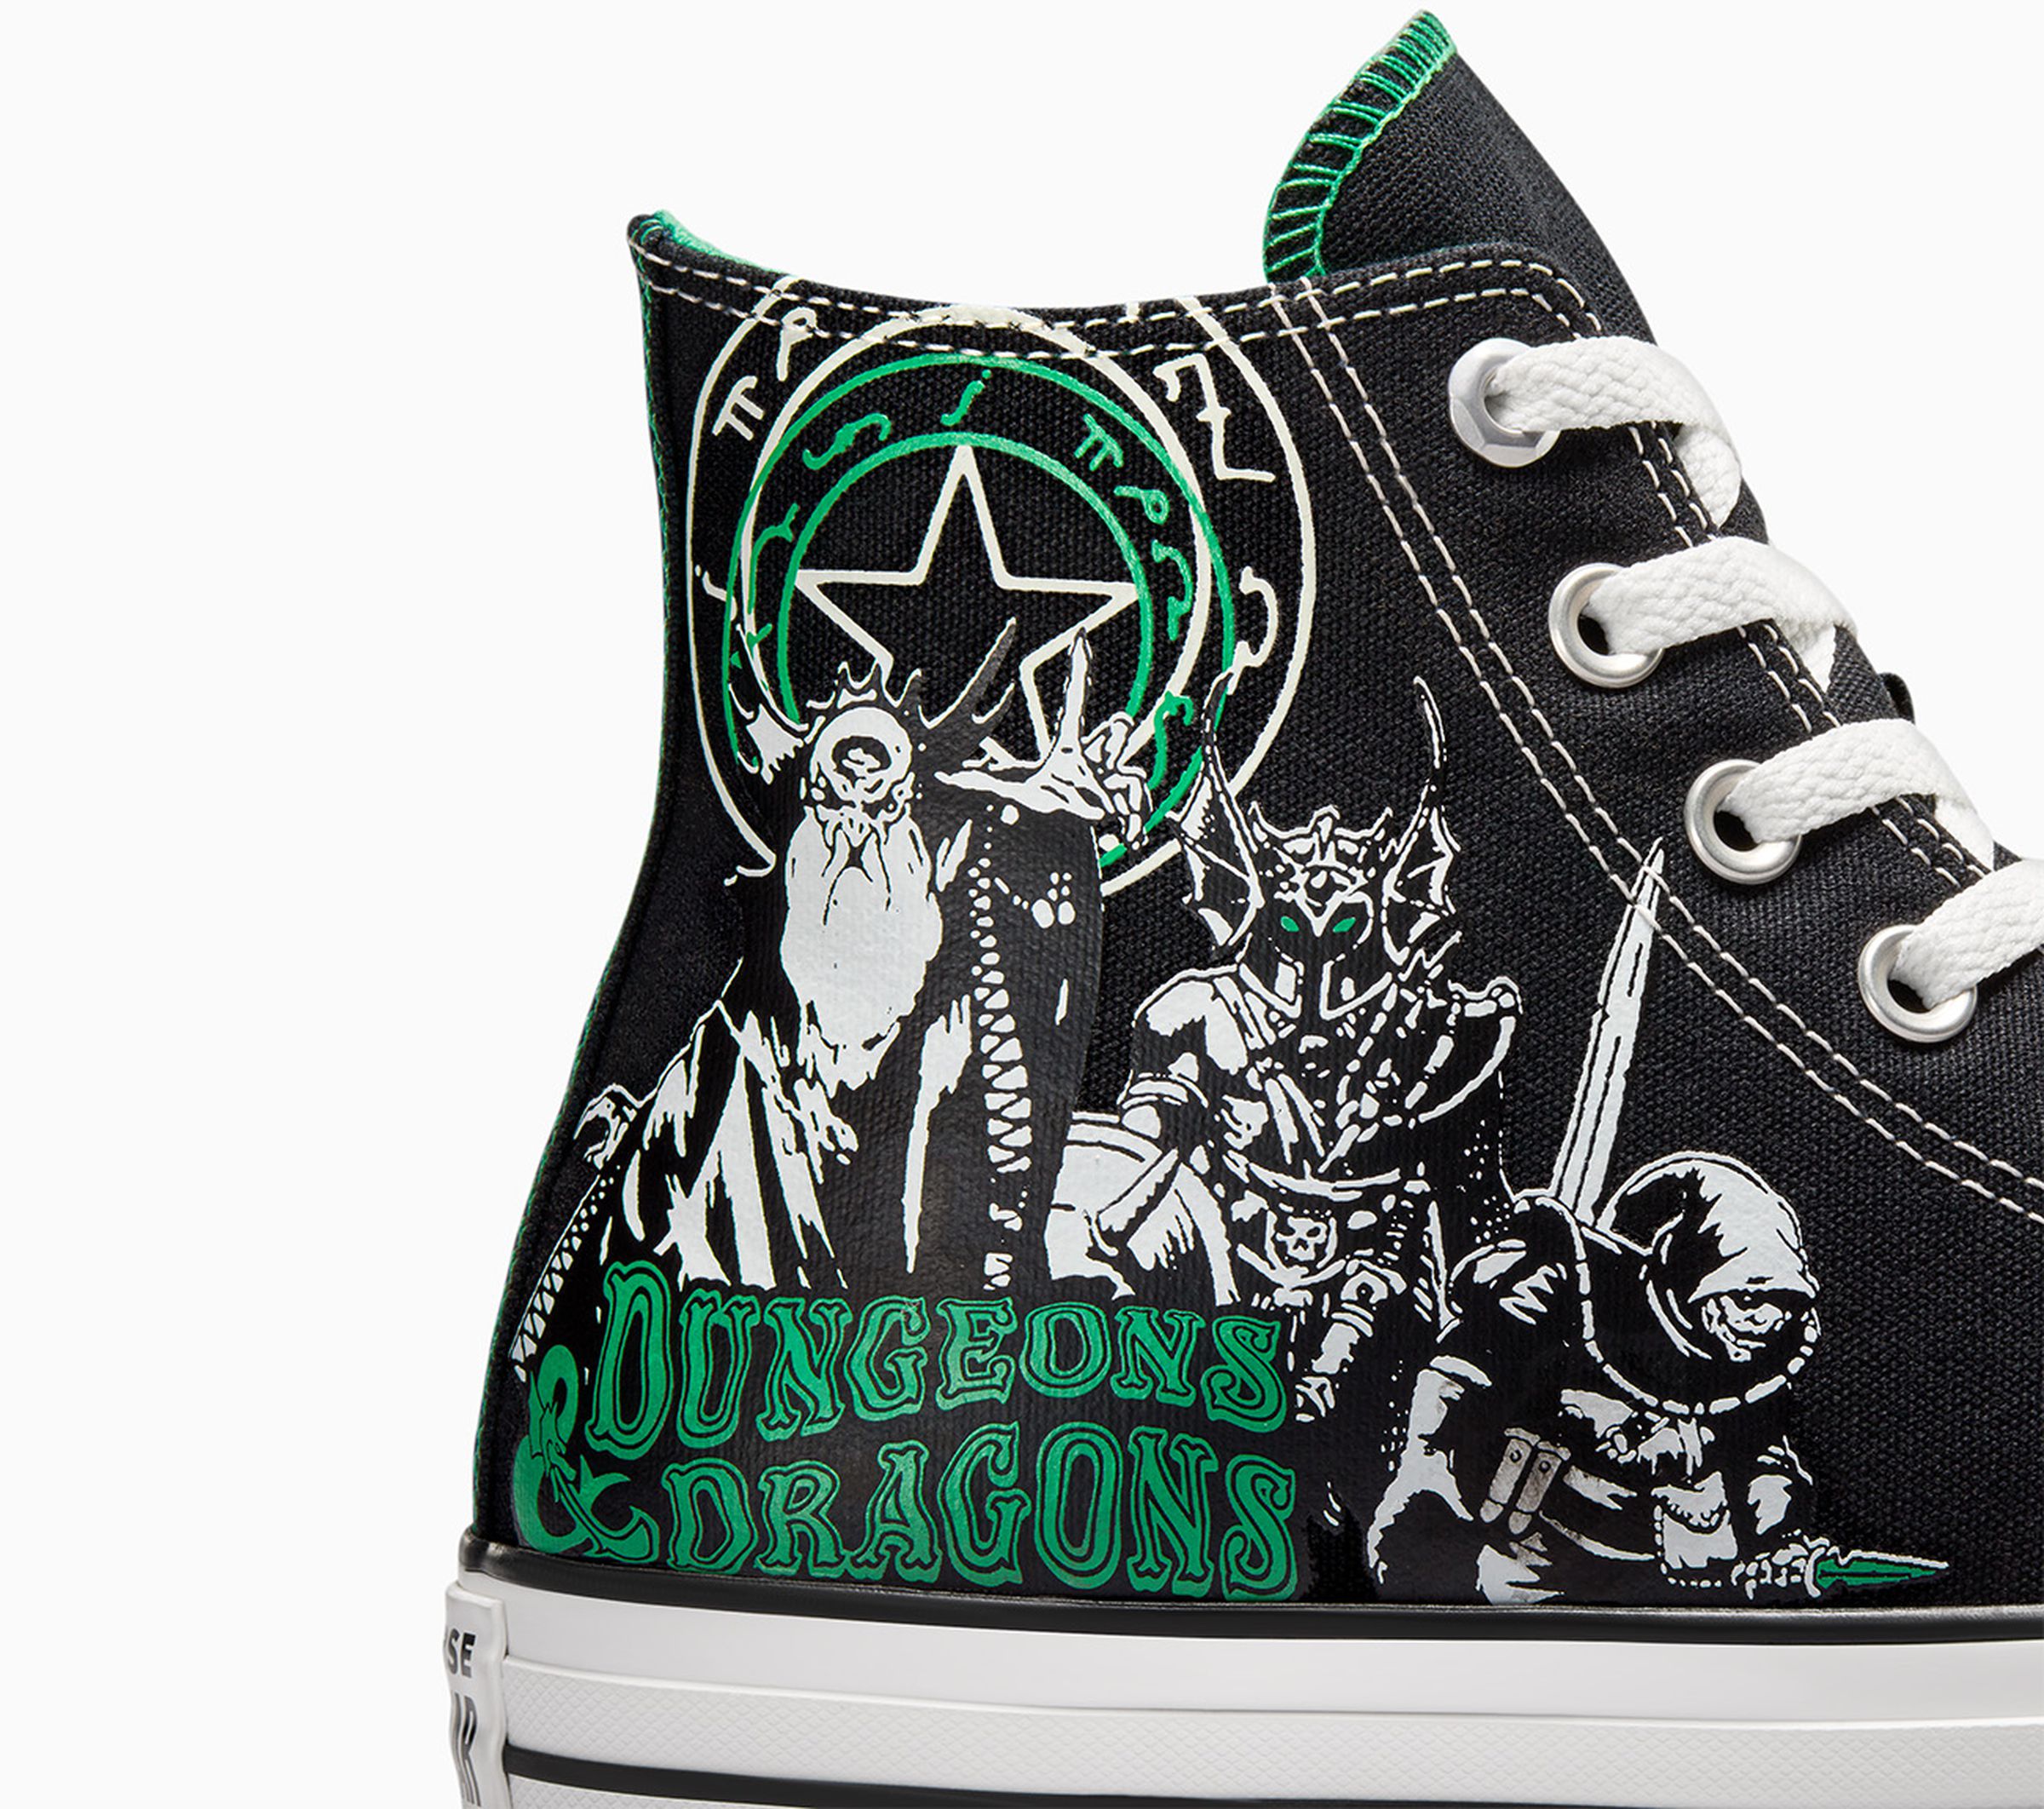 D&amp;D-themed Converse shoes featuring classic first edition characters.